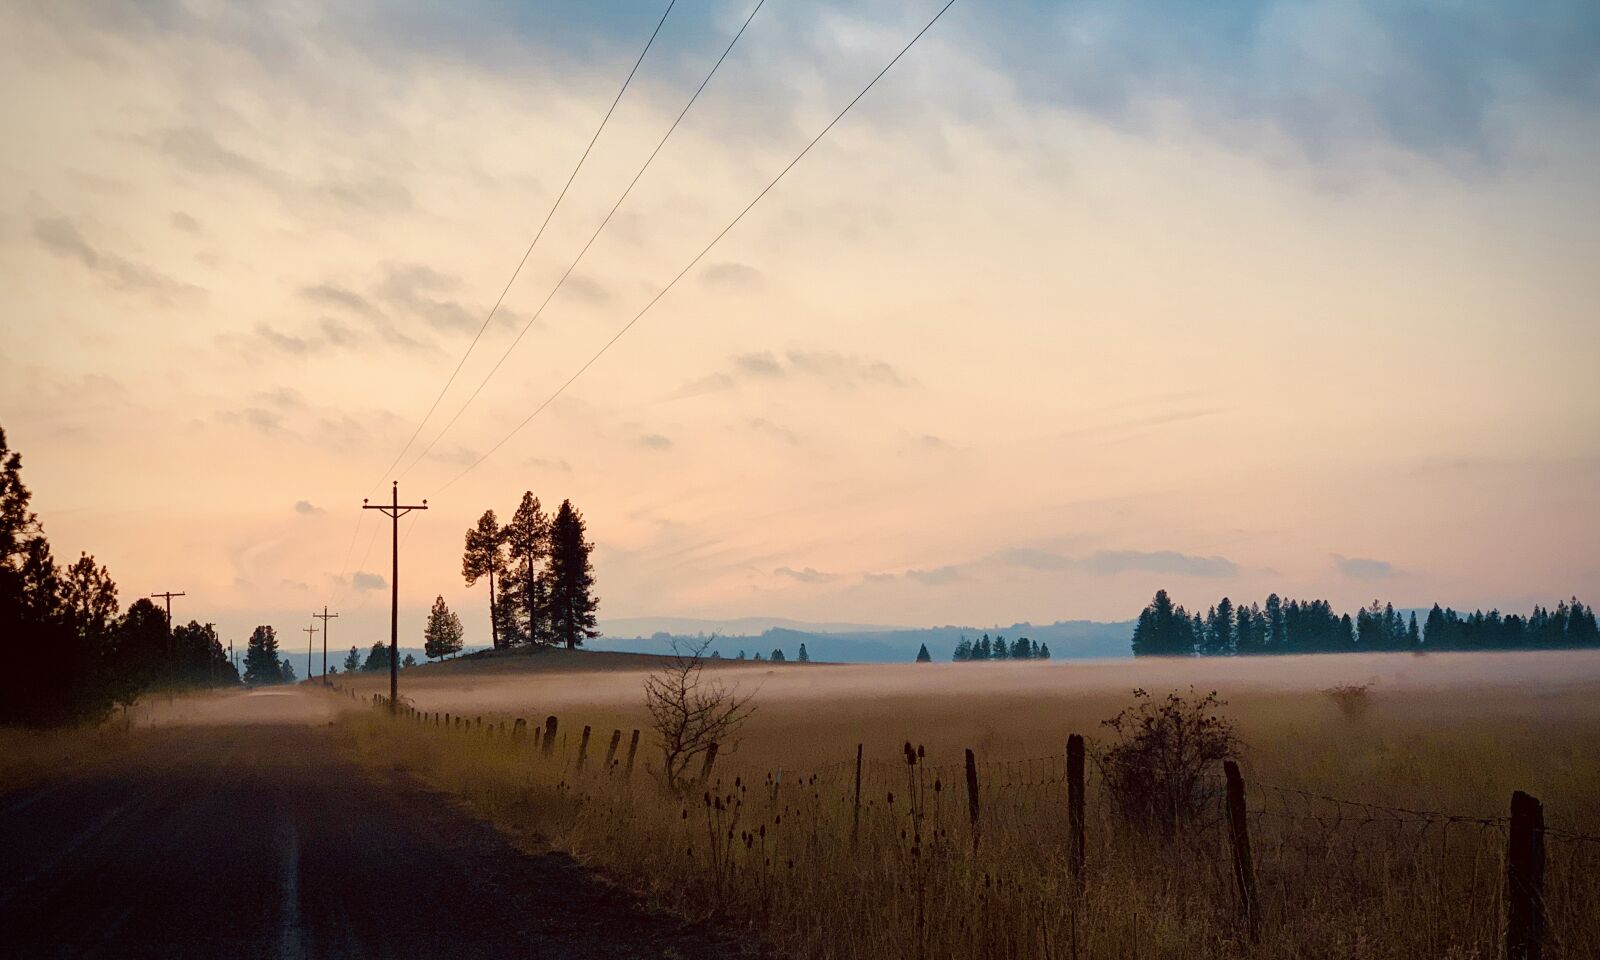 Apple iPhone XS Max sample photo. Country road, fog, landscape photography